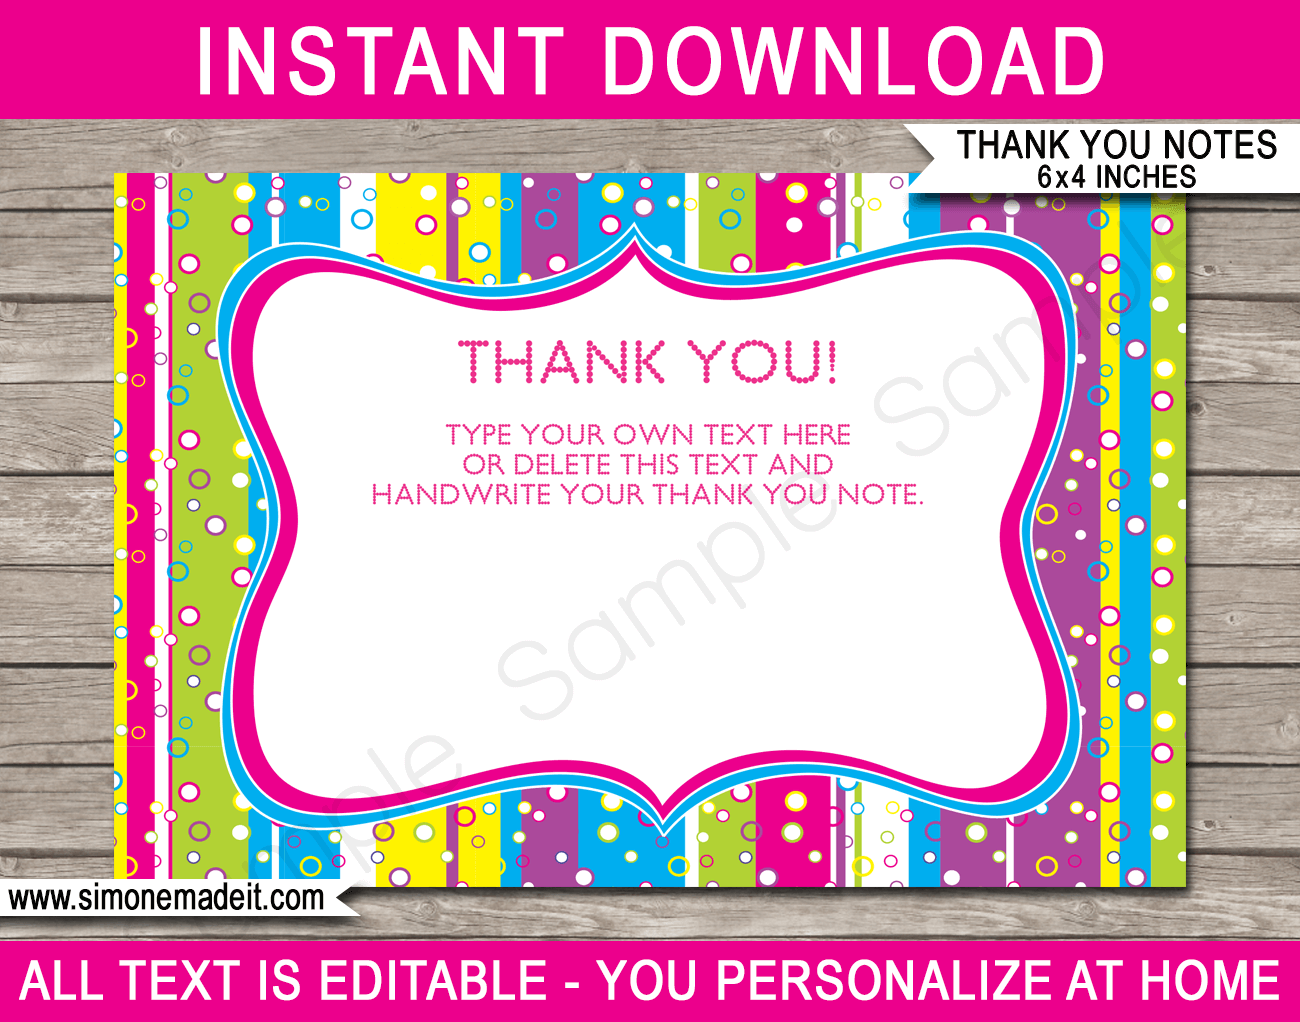 Printable Colorful Party Thank You Cards - Favor Tags - Colorful Birthday Party theme - Editable Template - Instant Download via simonemadeit.com